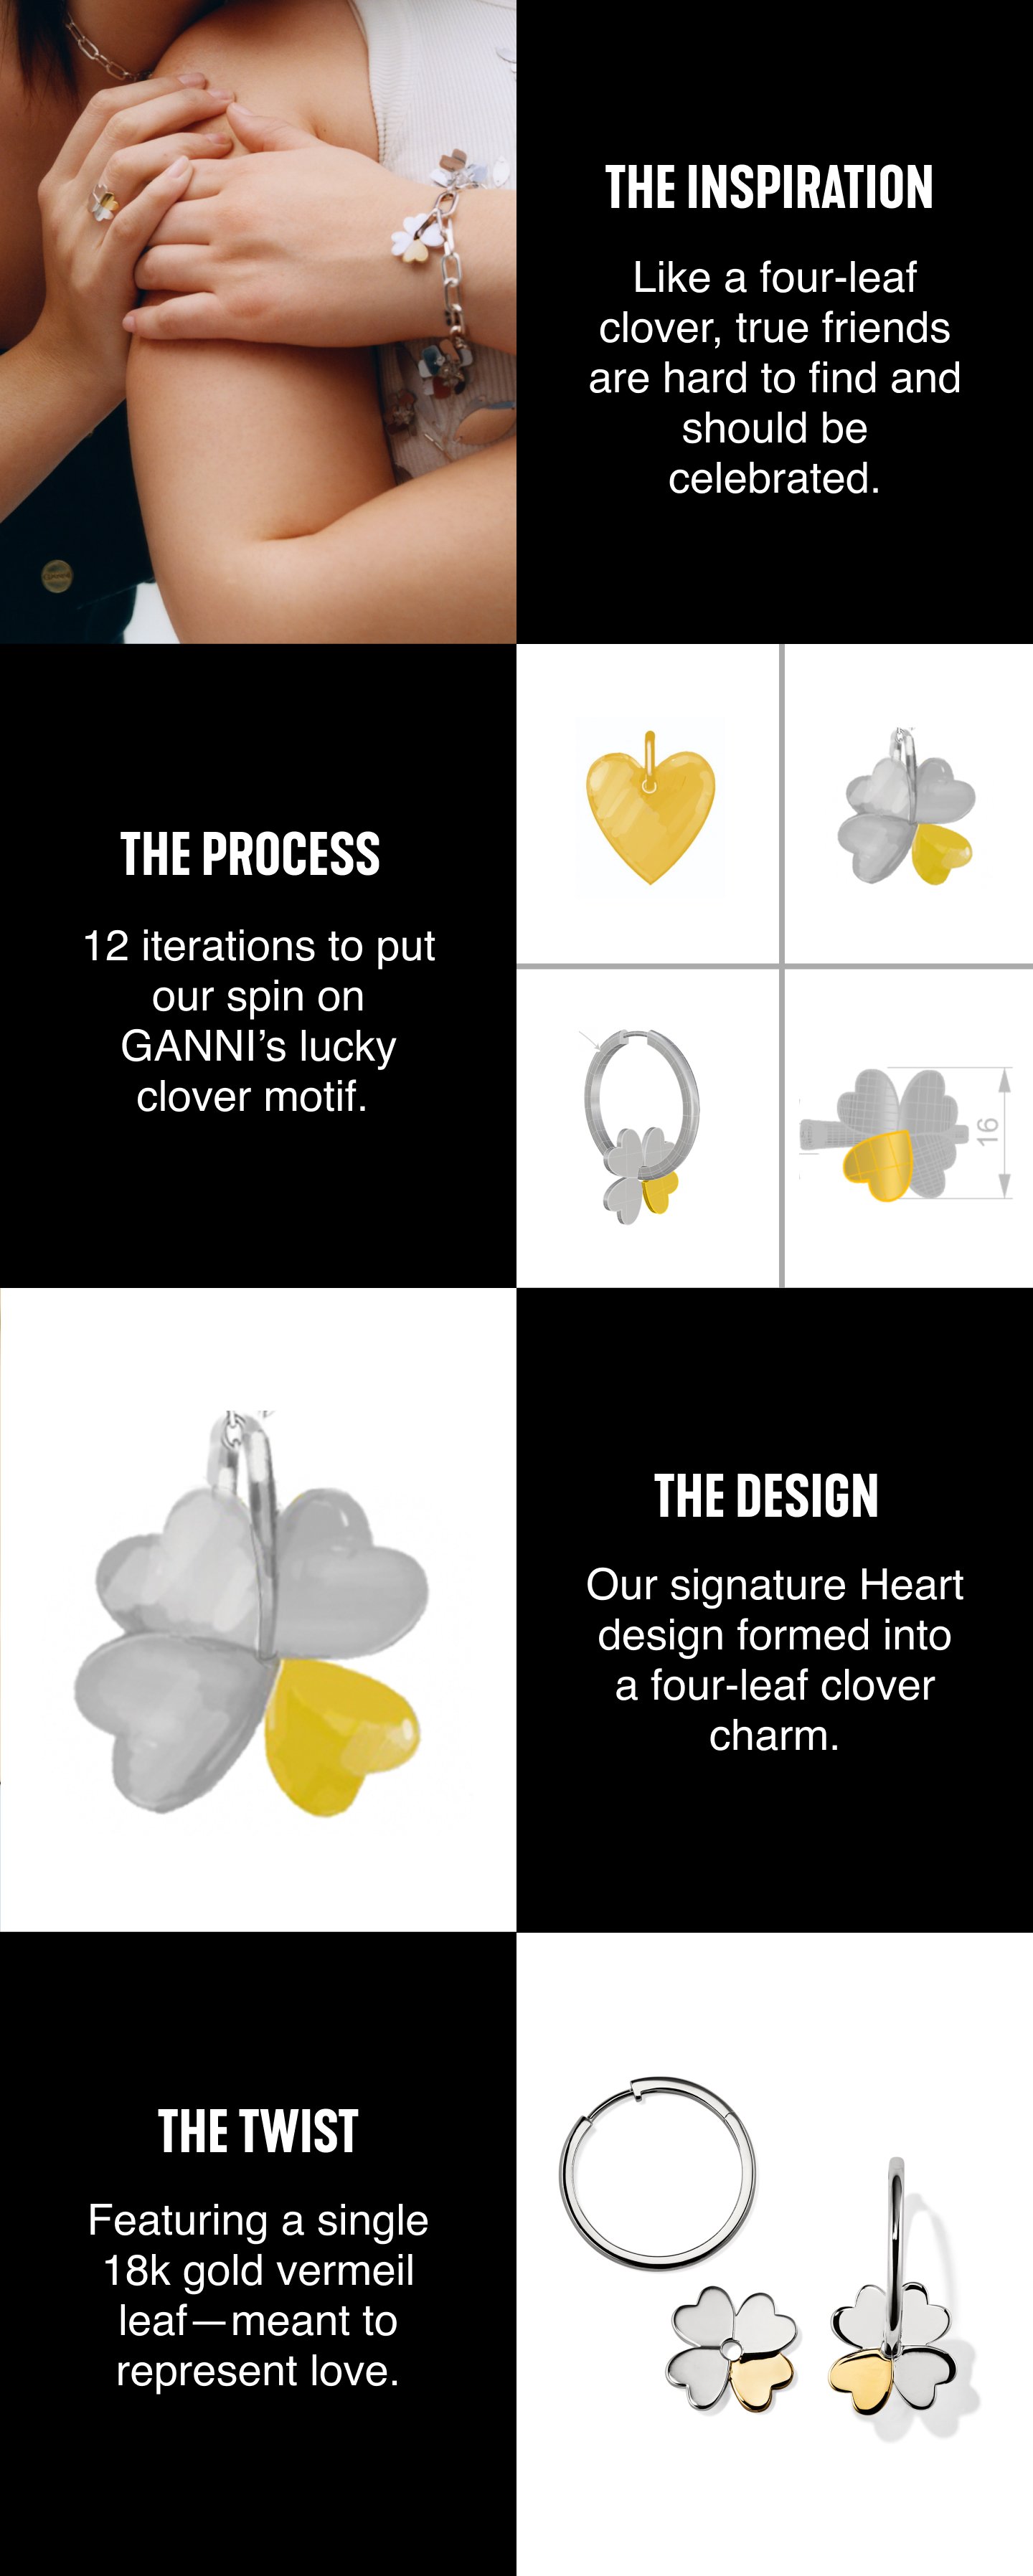 The Inspiration. Like a four-leaf clover, true friends are hard to find and should be celebrated. The Process. 12 iterations to put our spin on GANNI's lucky clover motif. The Design. Our signature Heart design formed into a four-leaf clover charm. The Twist. Featuring a single 18k gold vermeil leaf-meant to represent love.